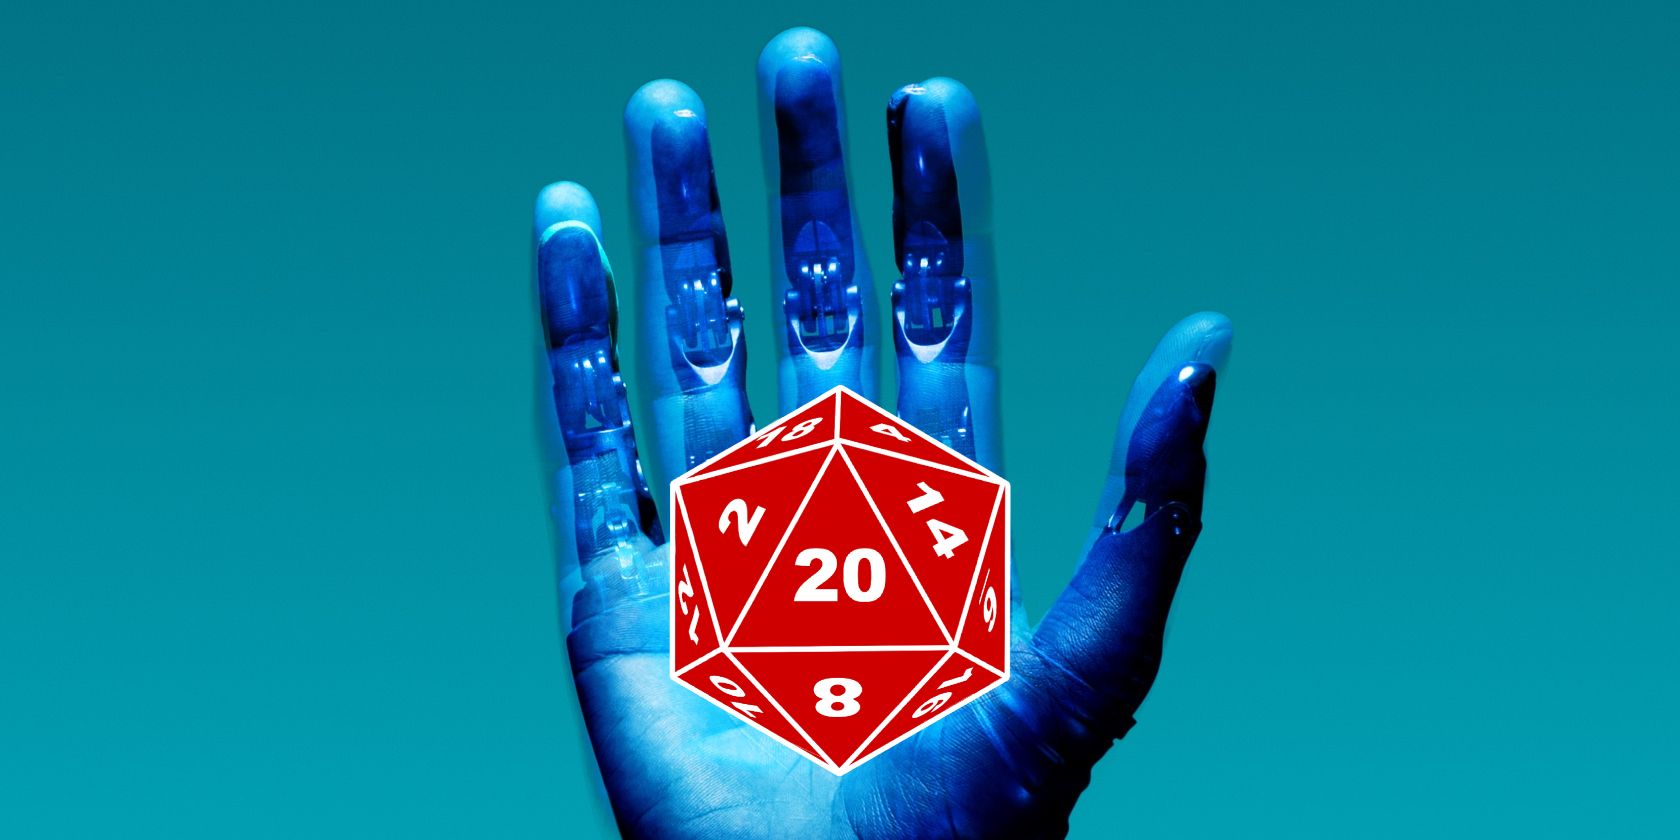 Blue robotic hand holding the image of a d20 die